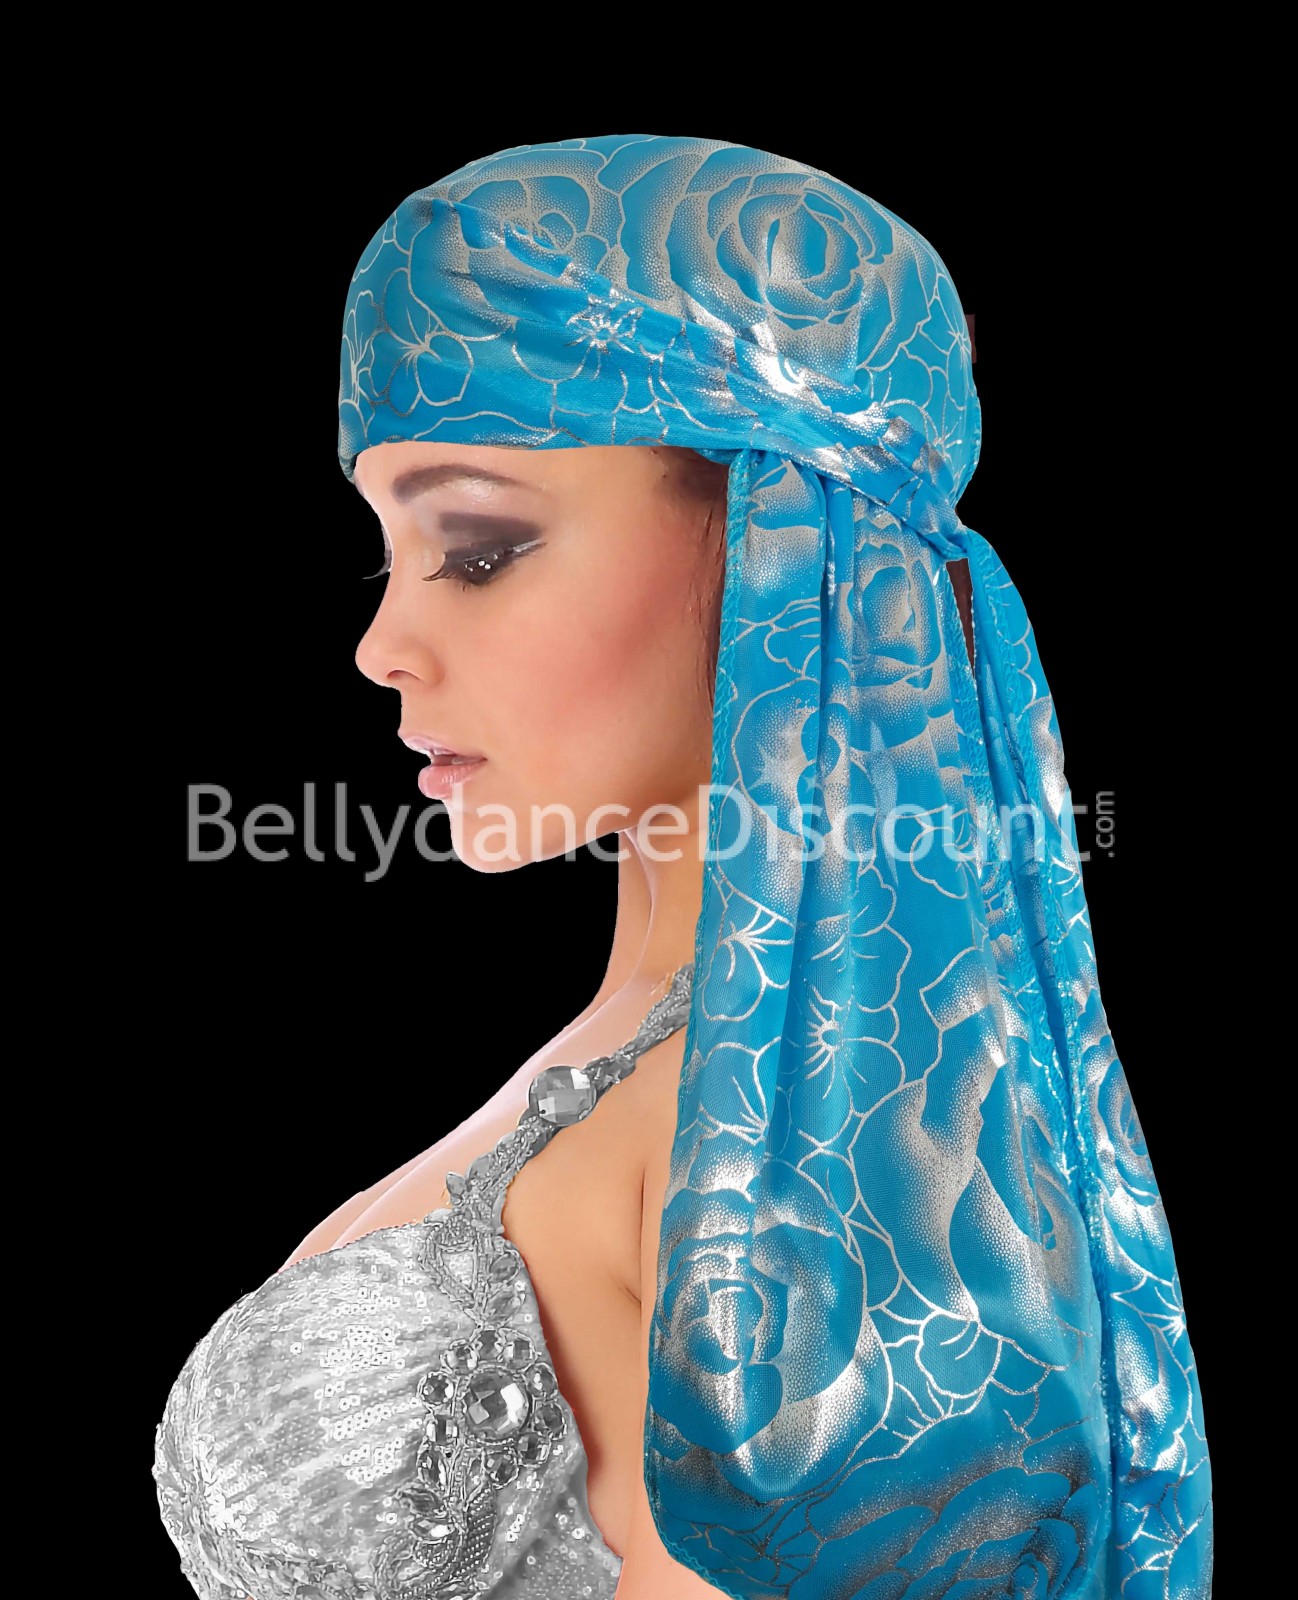 Silver and light blue durag